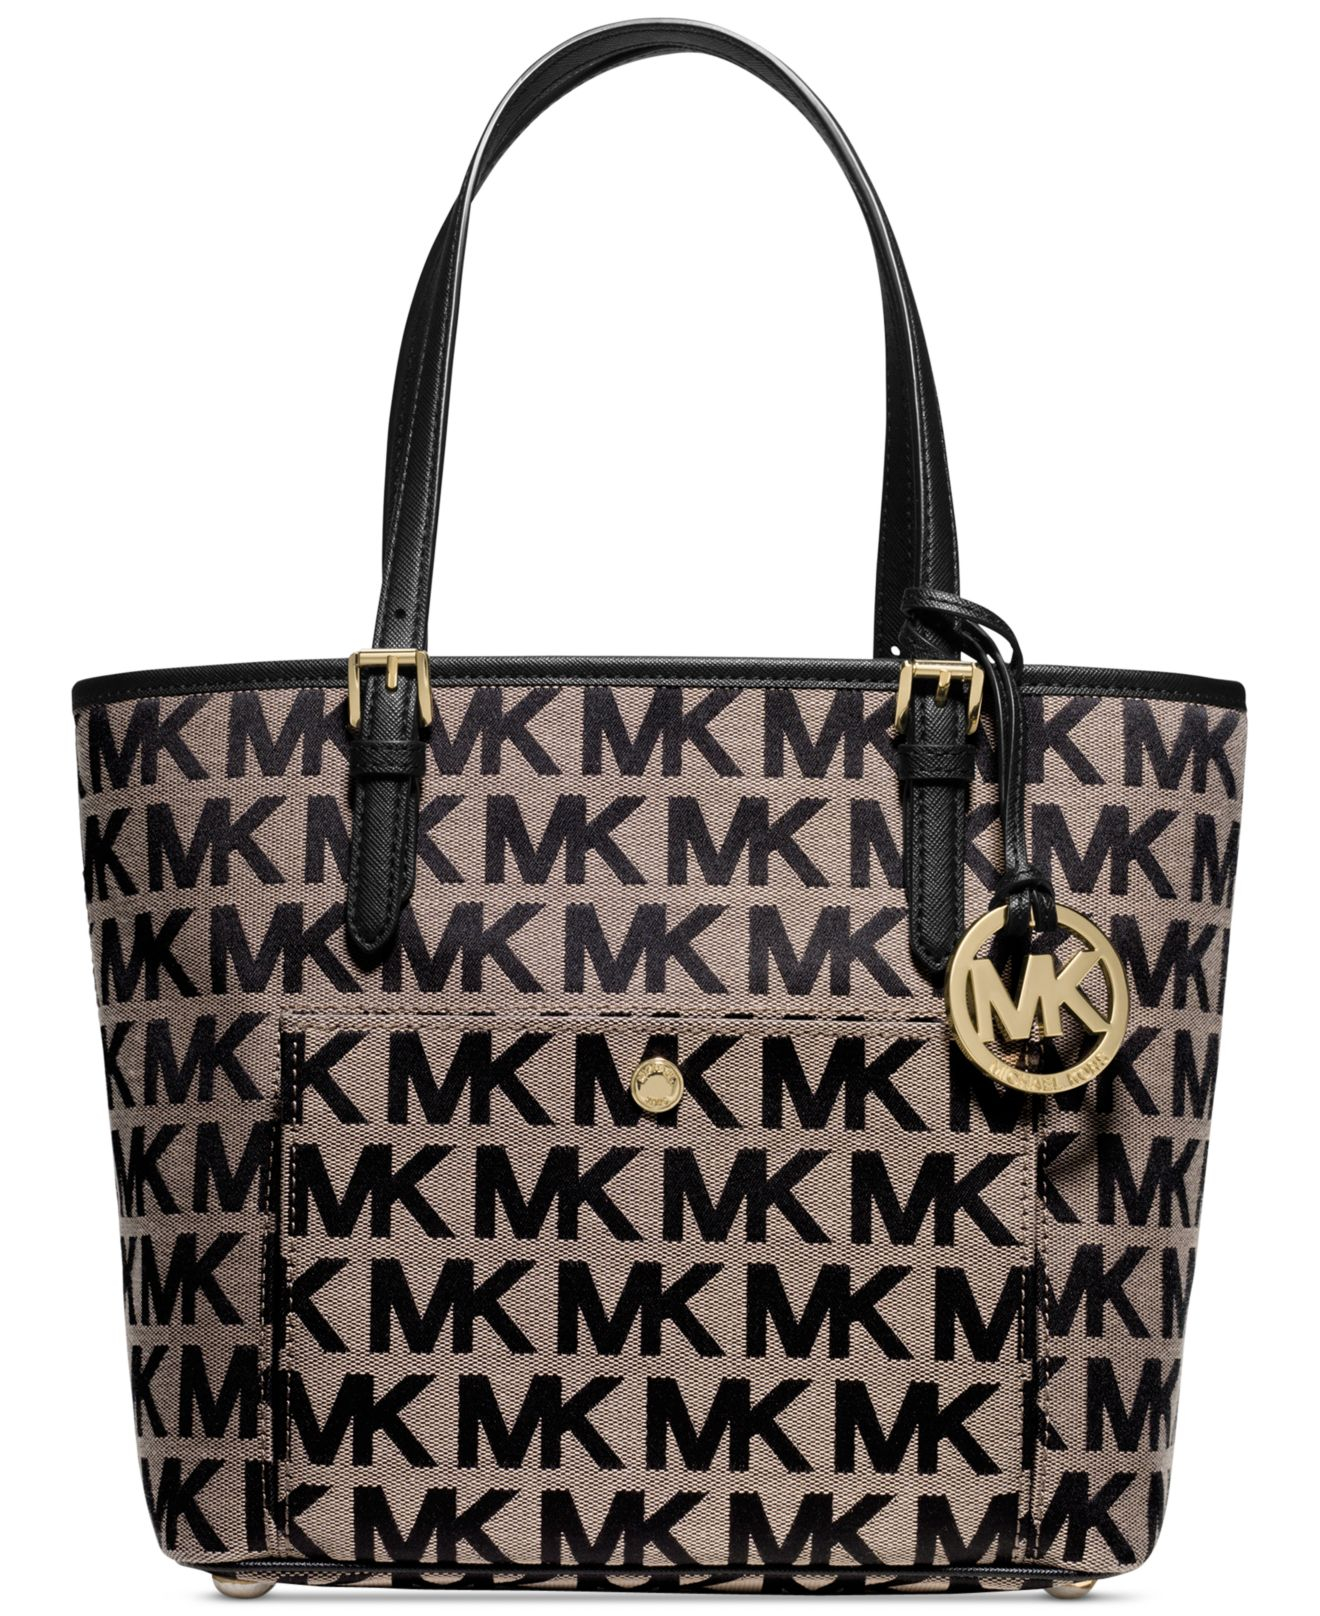 Michael Kors White Beige Coated Canvas and Leather Medium Jet Set Tote